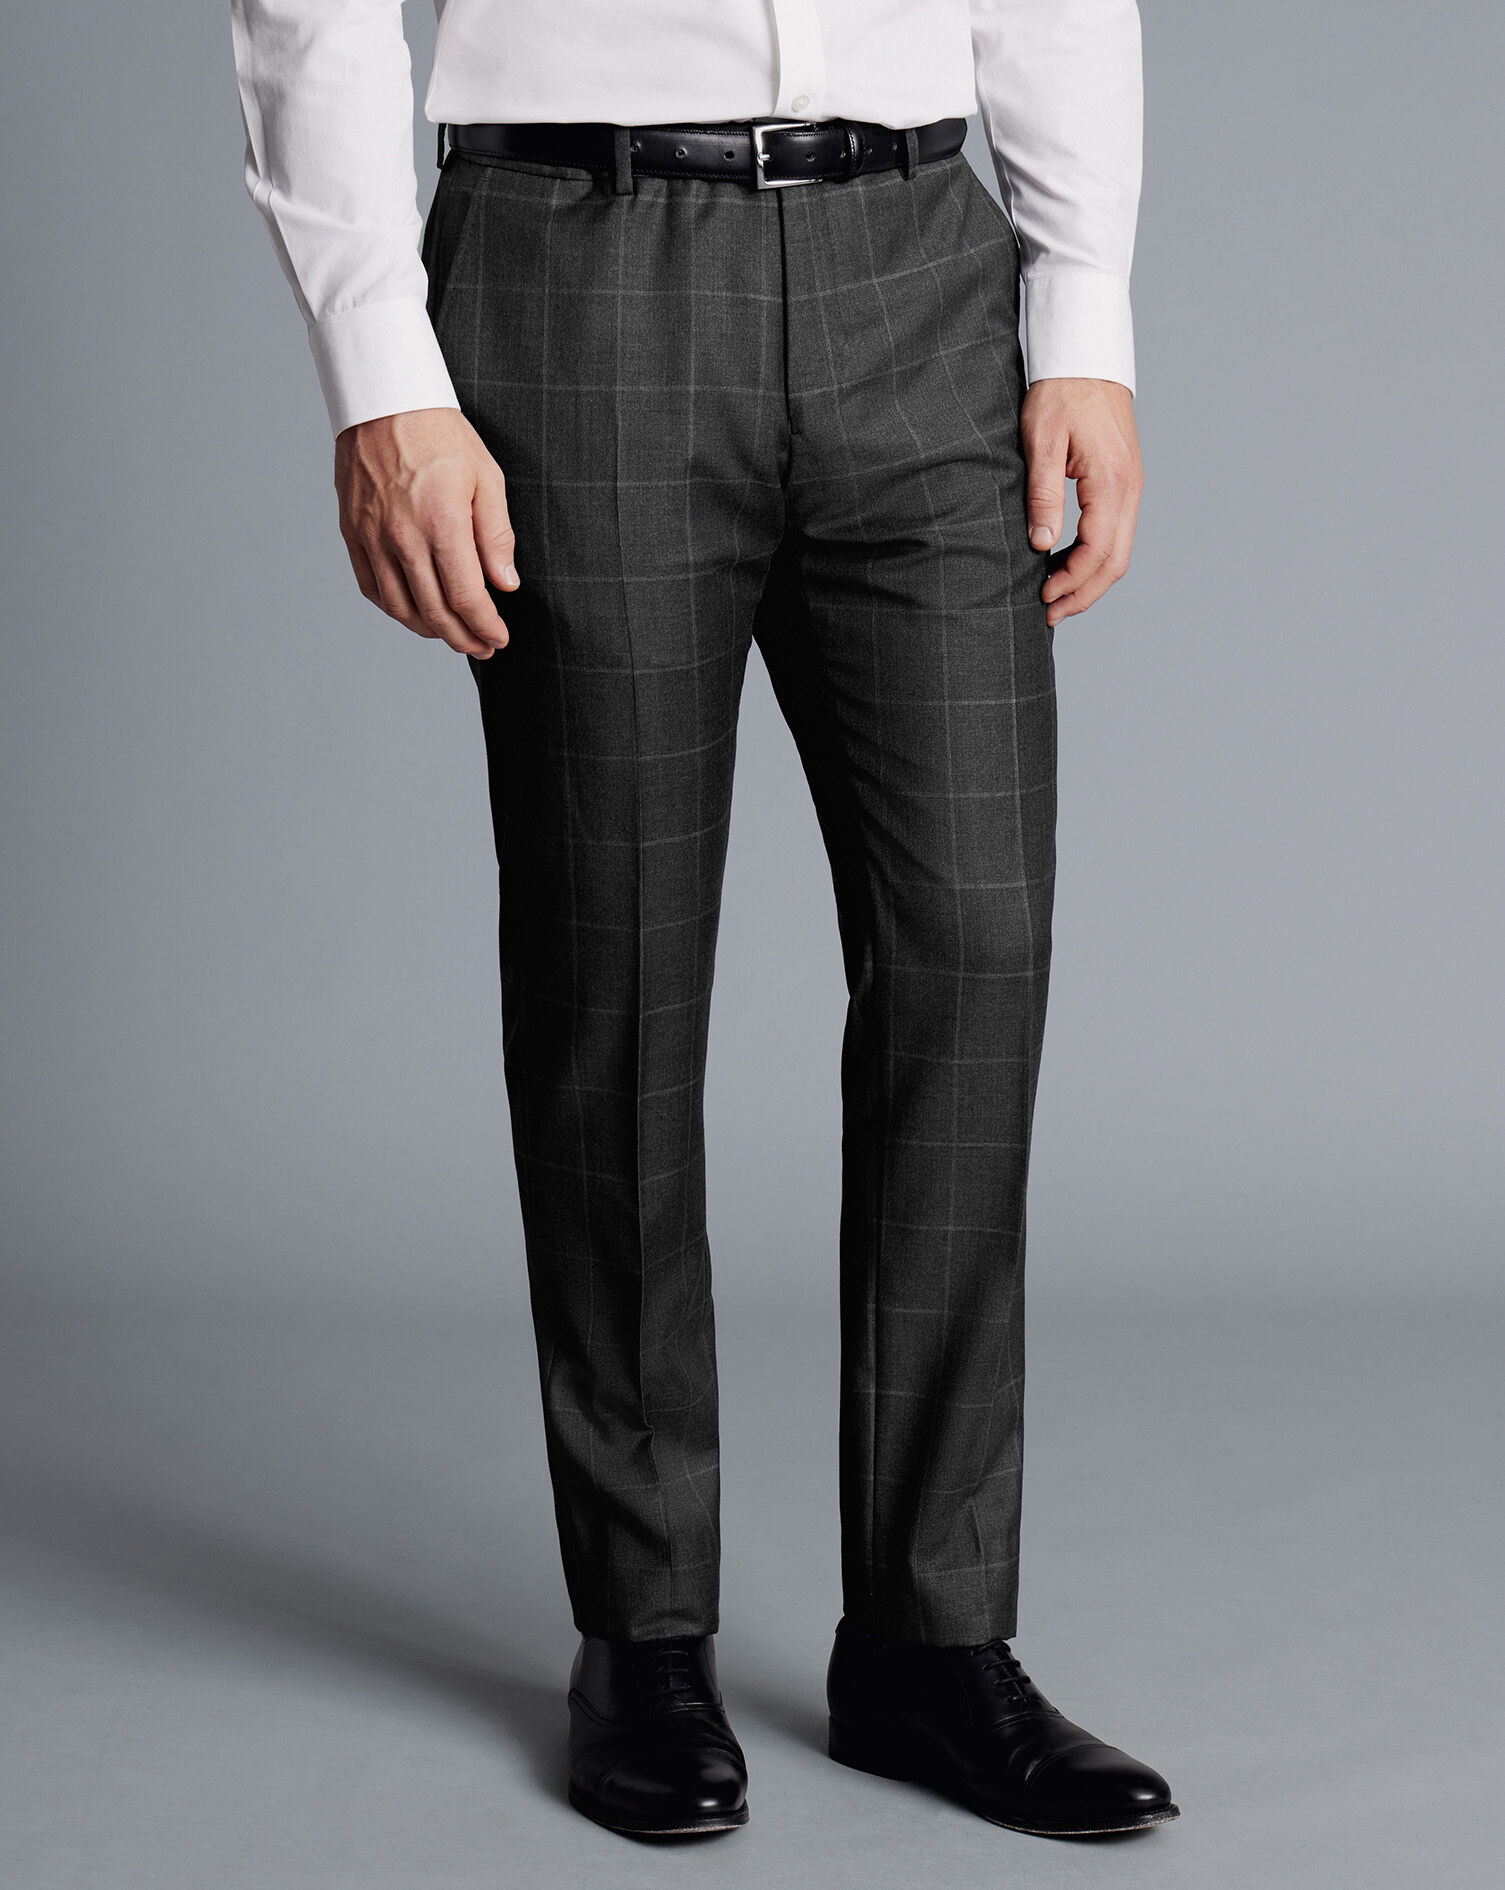 Skinny Check Suit Trousers | boohoo